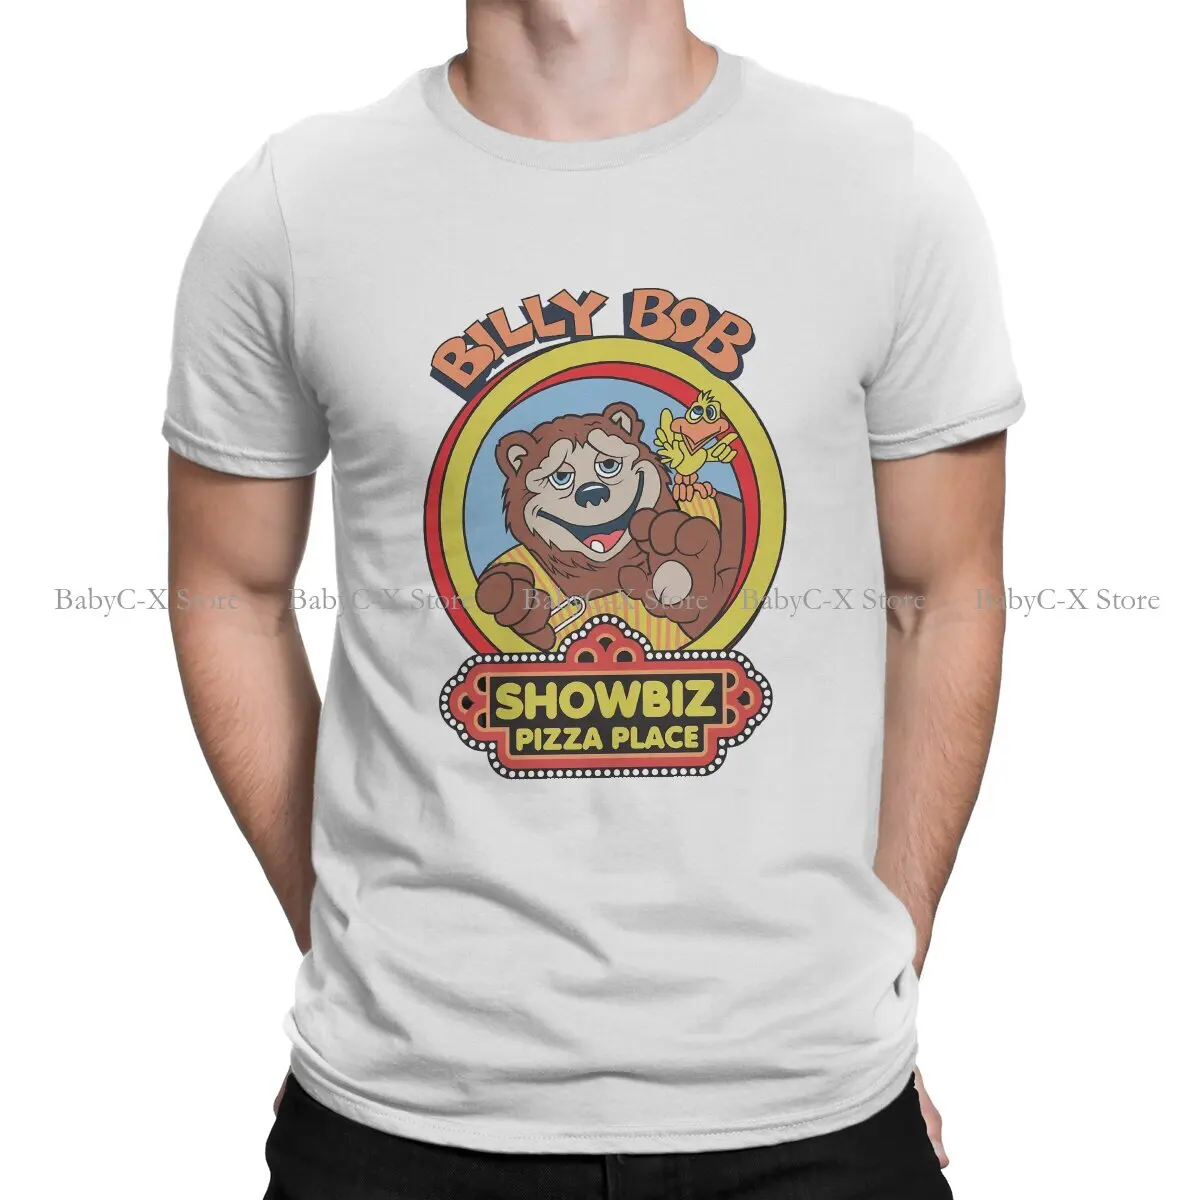 

Showbiz Pizza Billy Bob Graphic TShirt Chuck E Cheese Dining Room Style Streetwear Leisure T Shirt Male Tee Unique Polyester